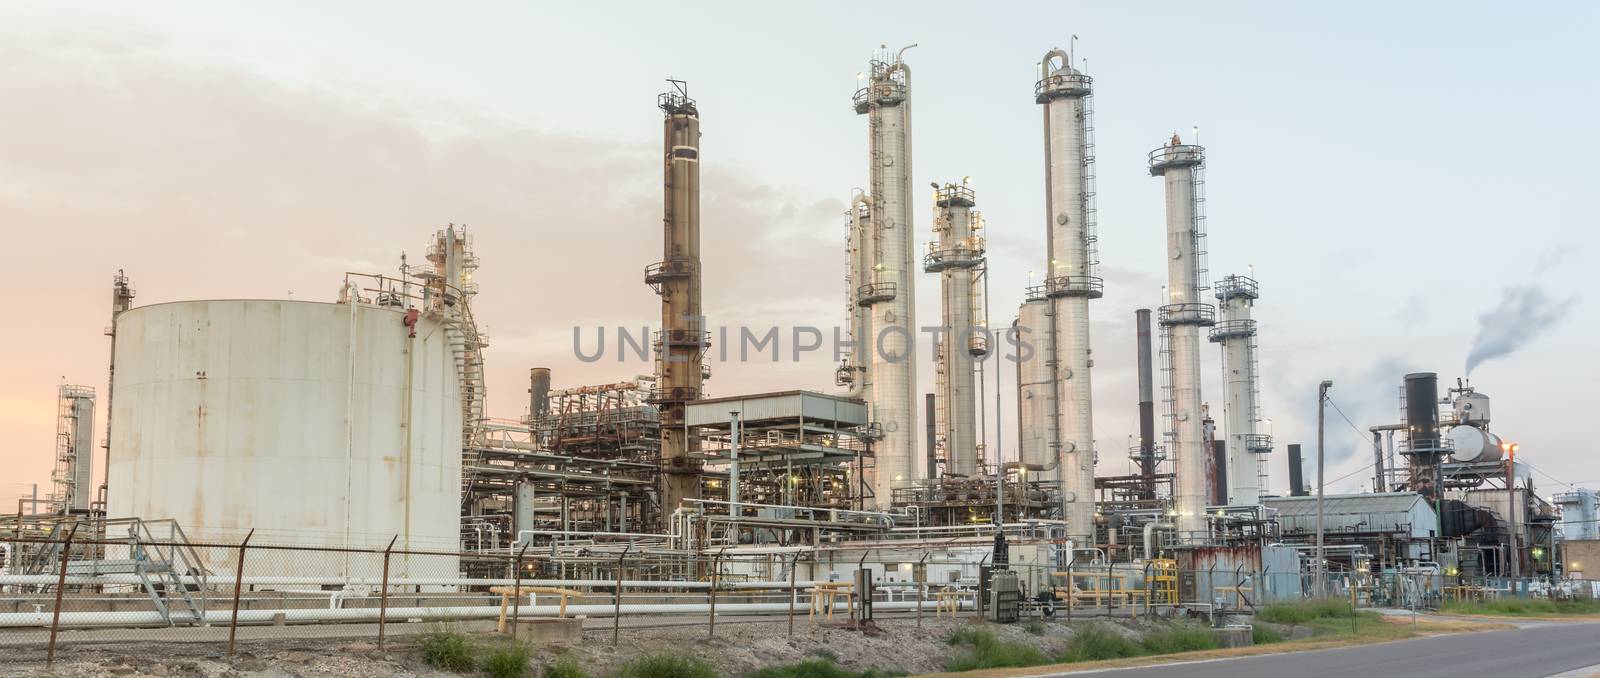 Panorama view petroleum refineries or chemical plants at sunrise in Texas, USA by trongnguyen